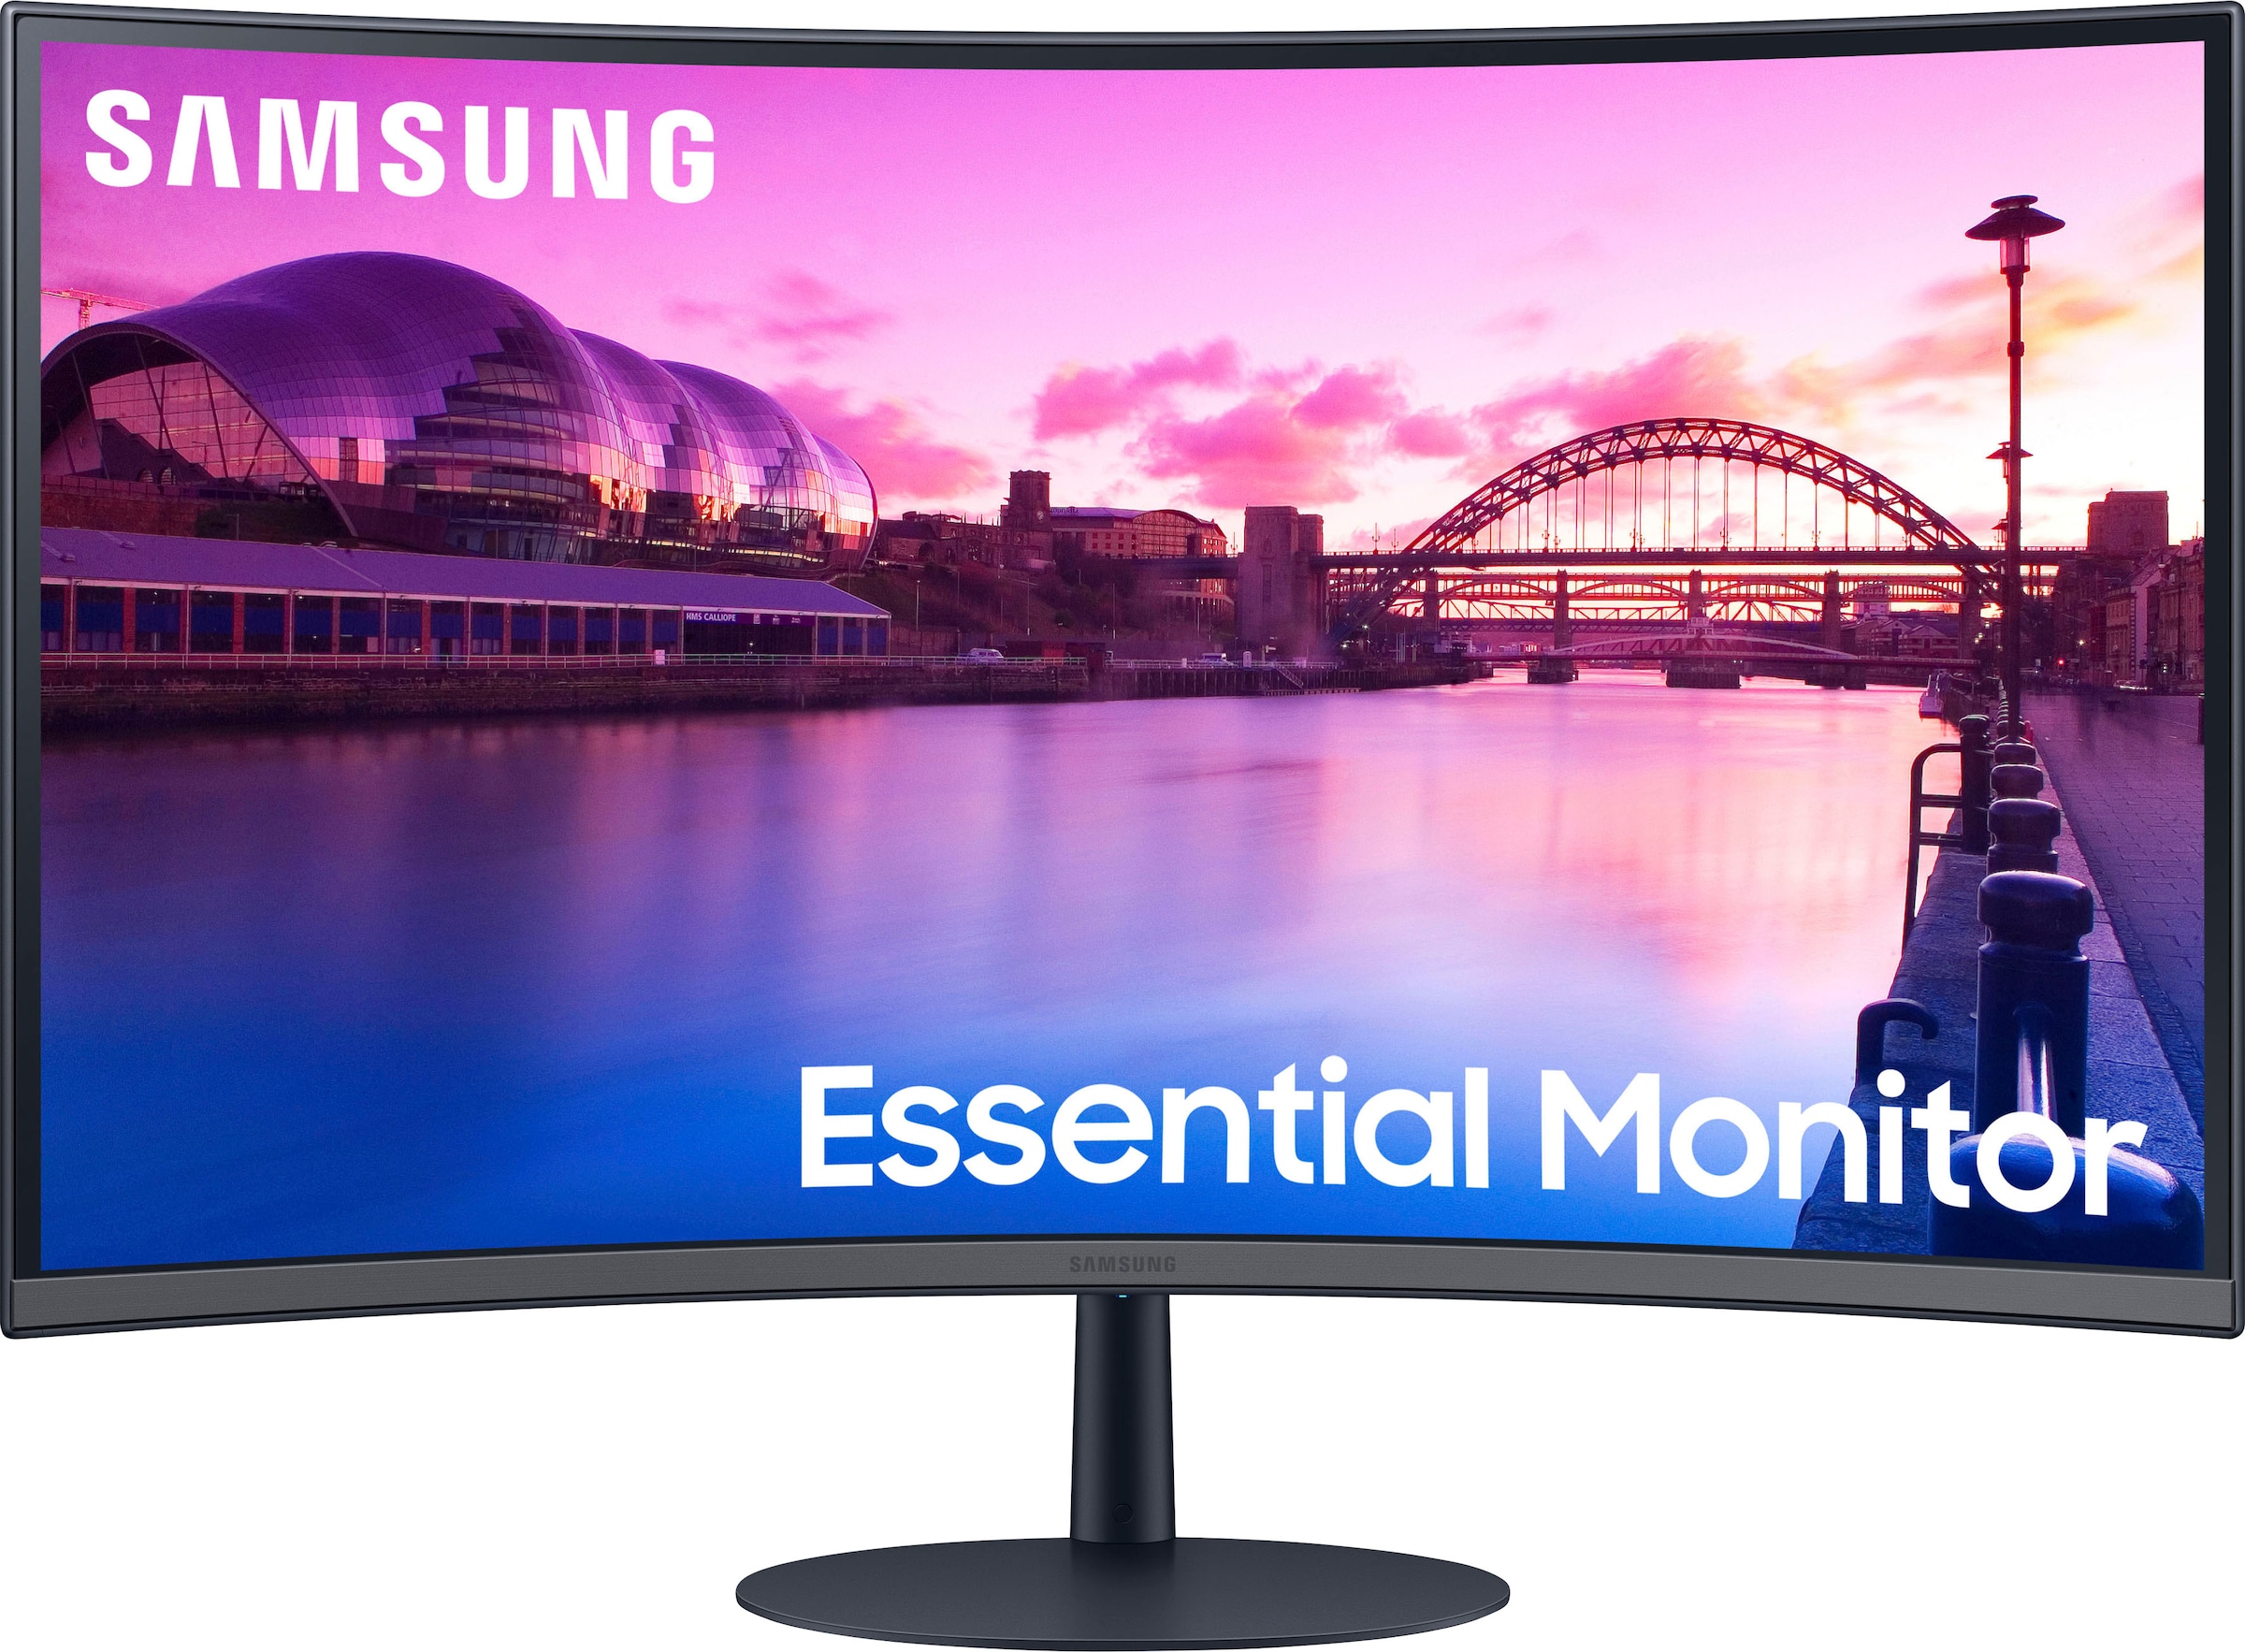 Samsung Curved-LED-Monitor »S27C390EAU«, 68,6 cm/27 Zoll, 1920 x 1080 px,  Full HD, 4 ms Reaktionszeit, 75 Hz online bei OTTO